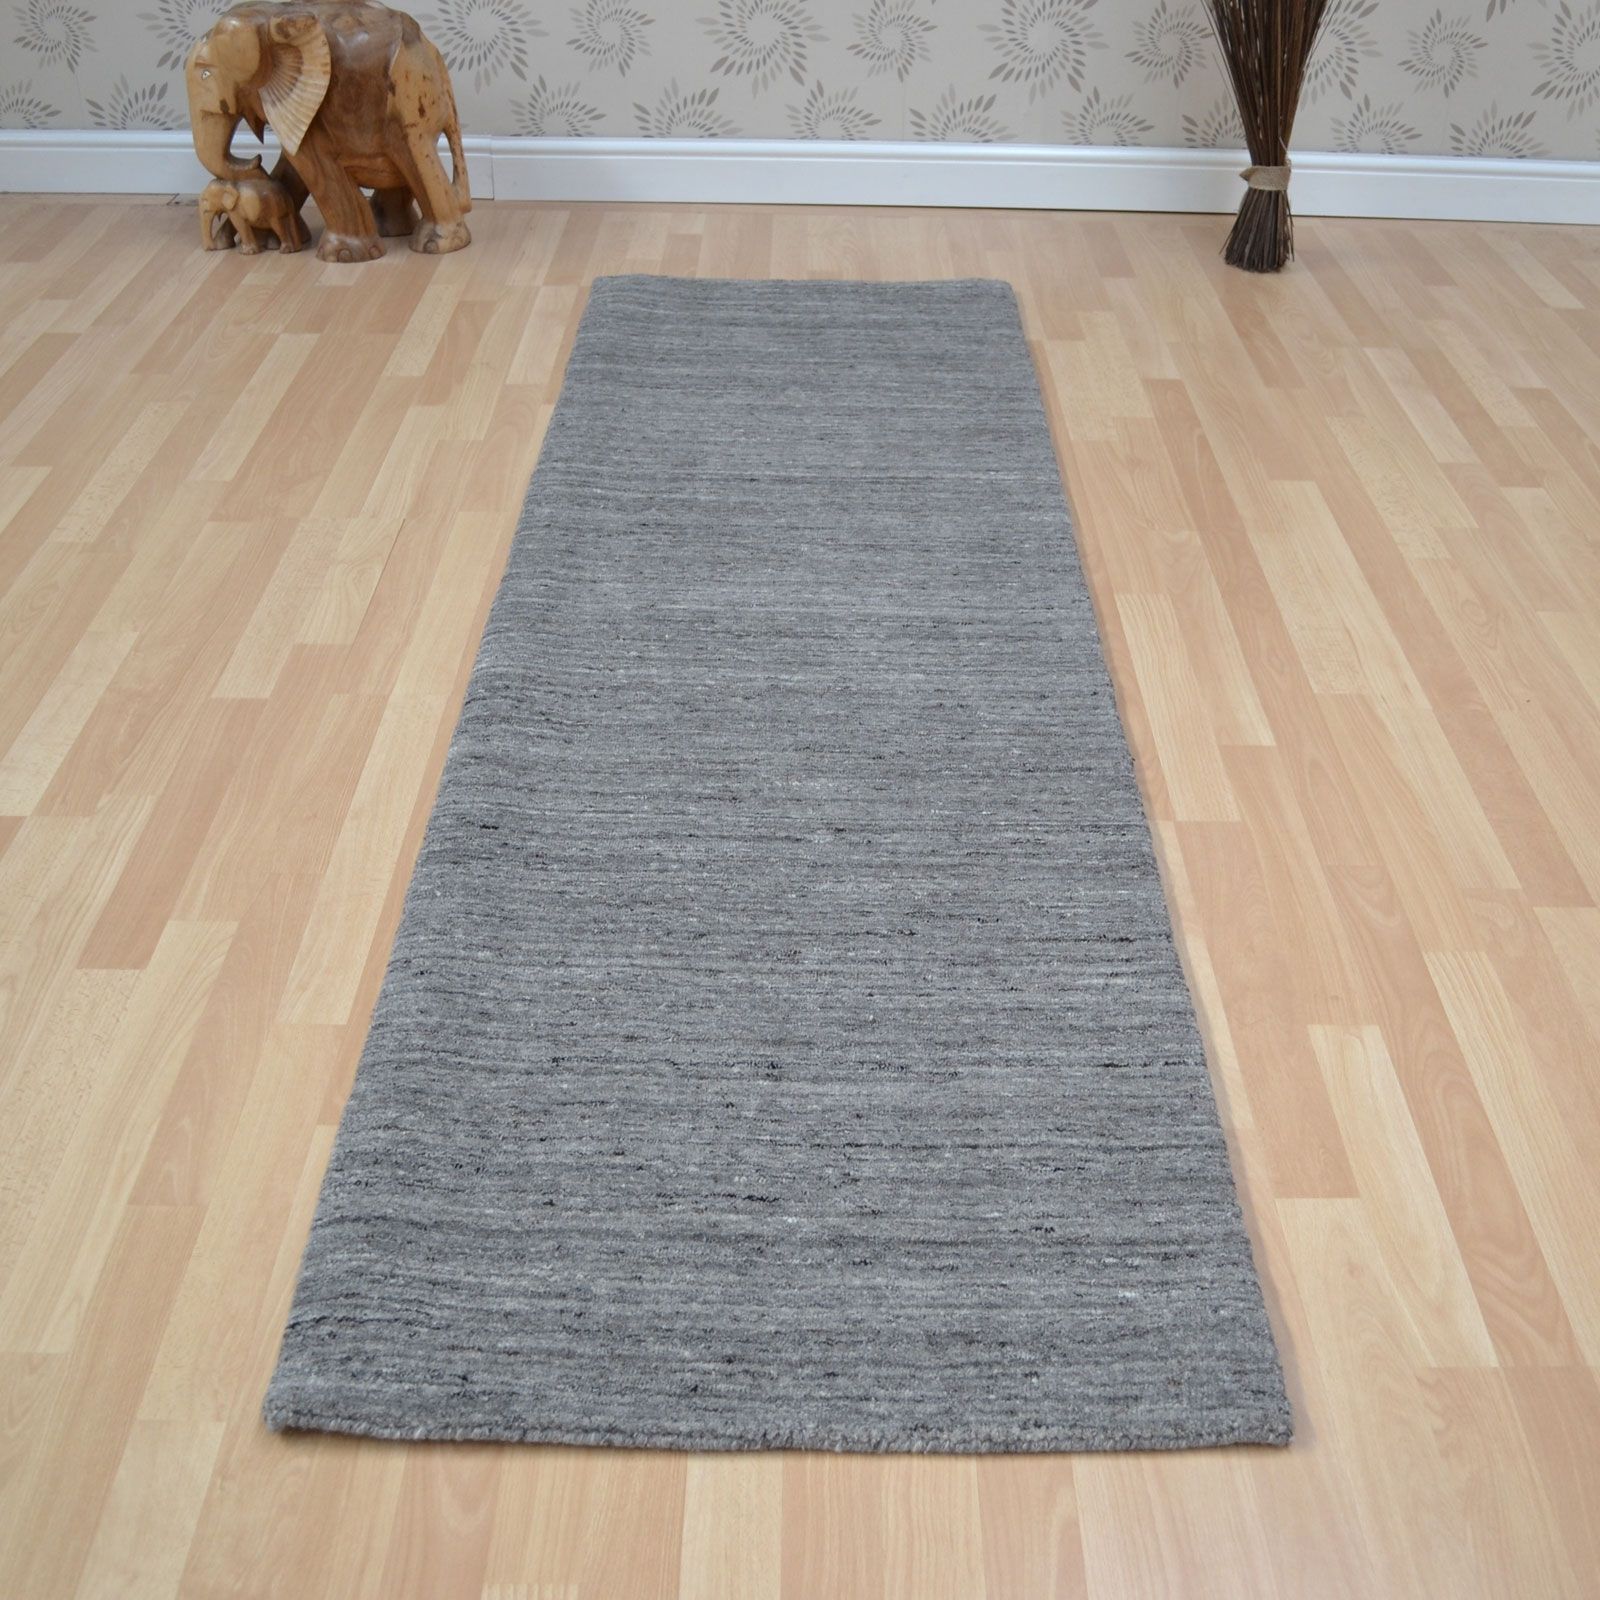 Grey Runner Rugs Roselawnlutheran Within Black Runner Rugs For Hallway (View 6 of 20)